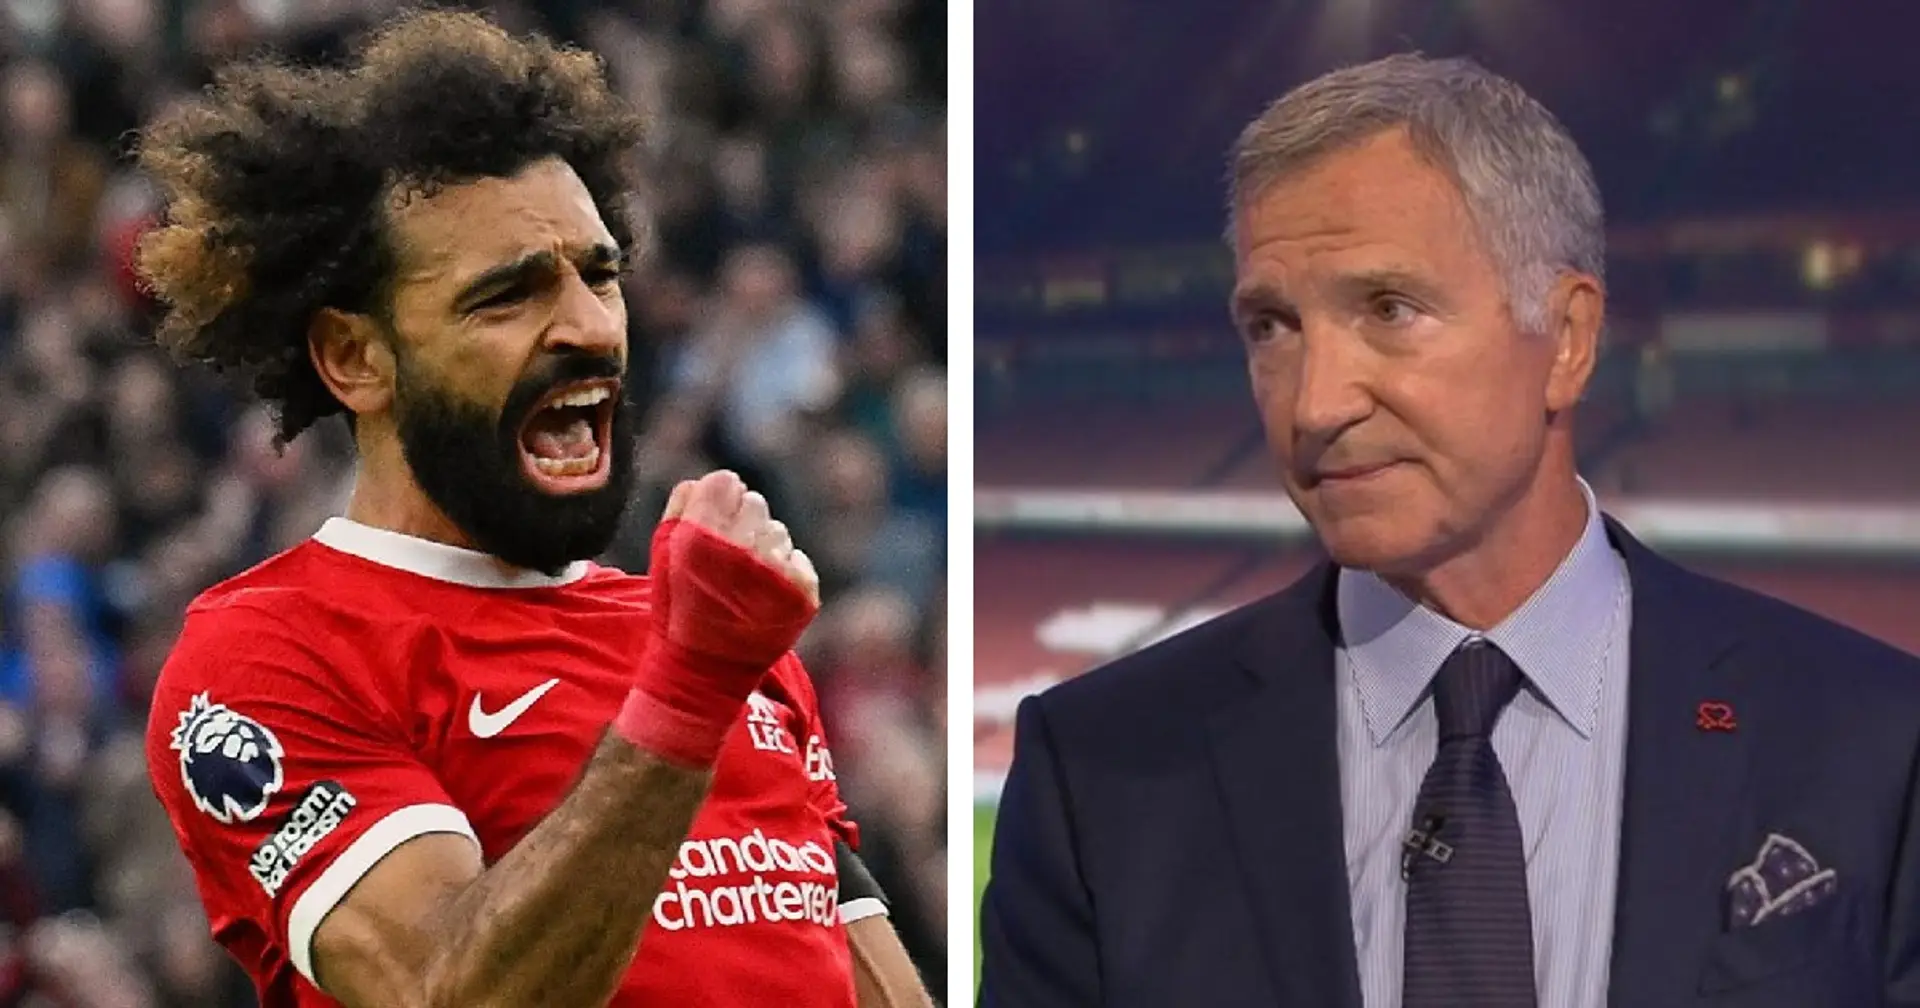 Graeme Souness claims Mo Salah may have done a Cristiano Ronaldo-type deal with Liverpool